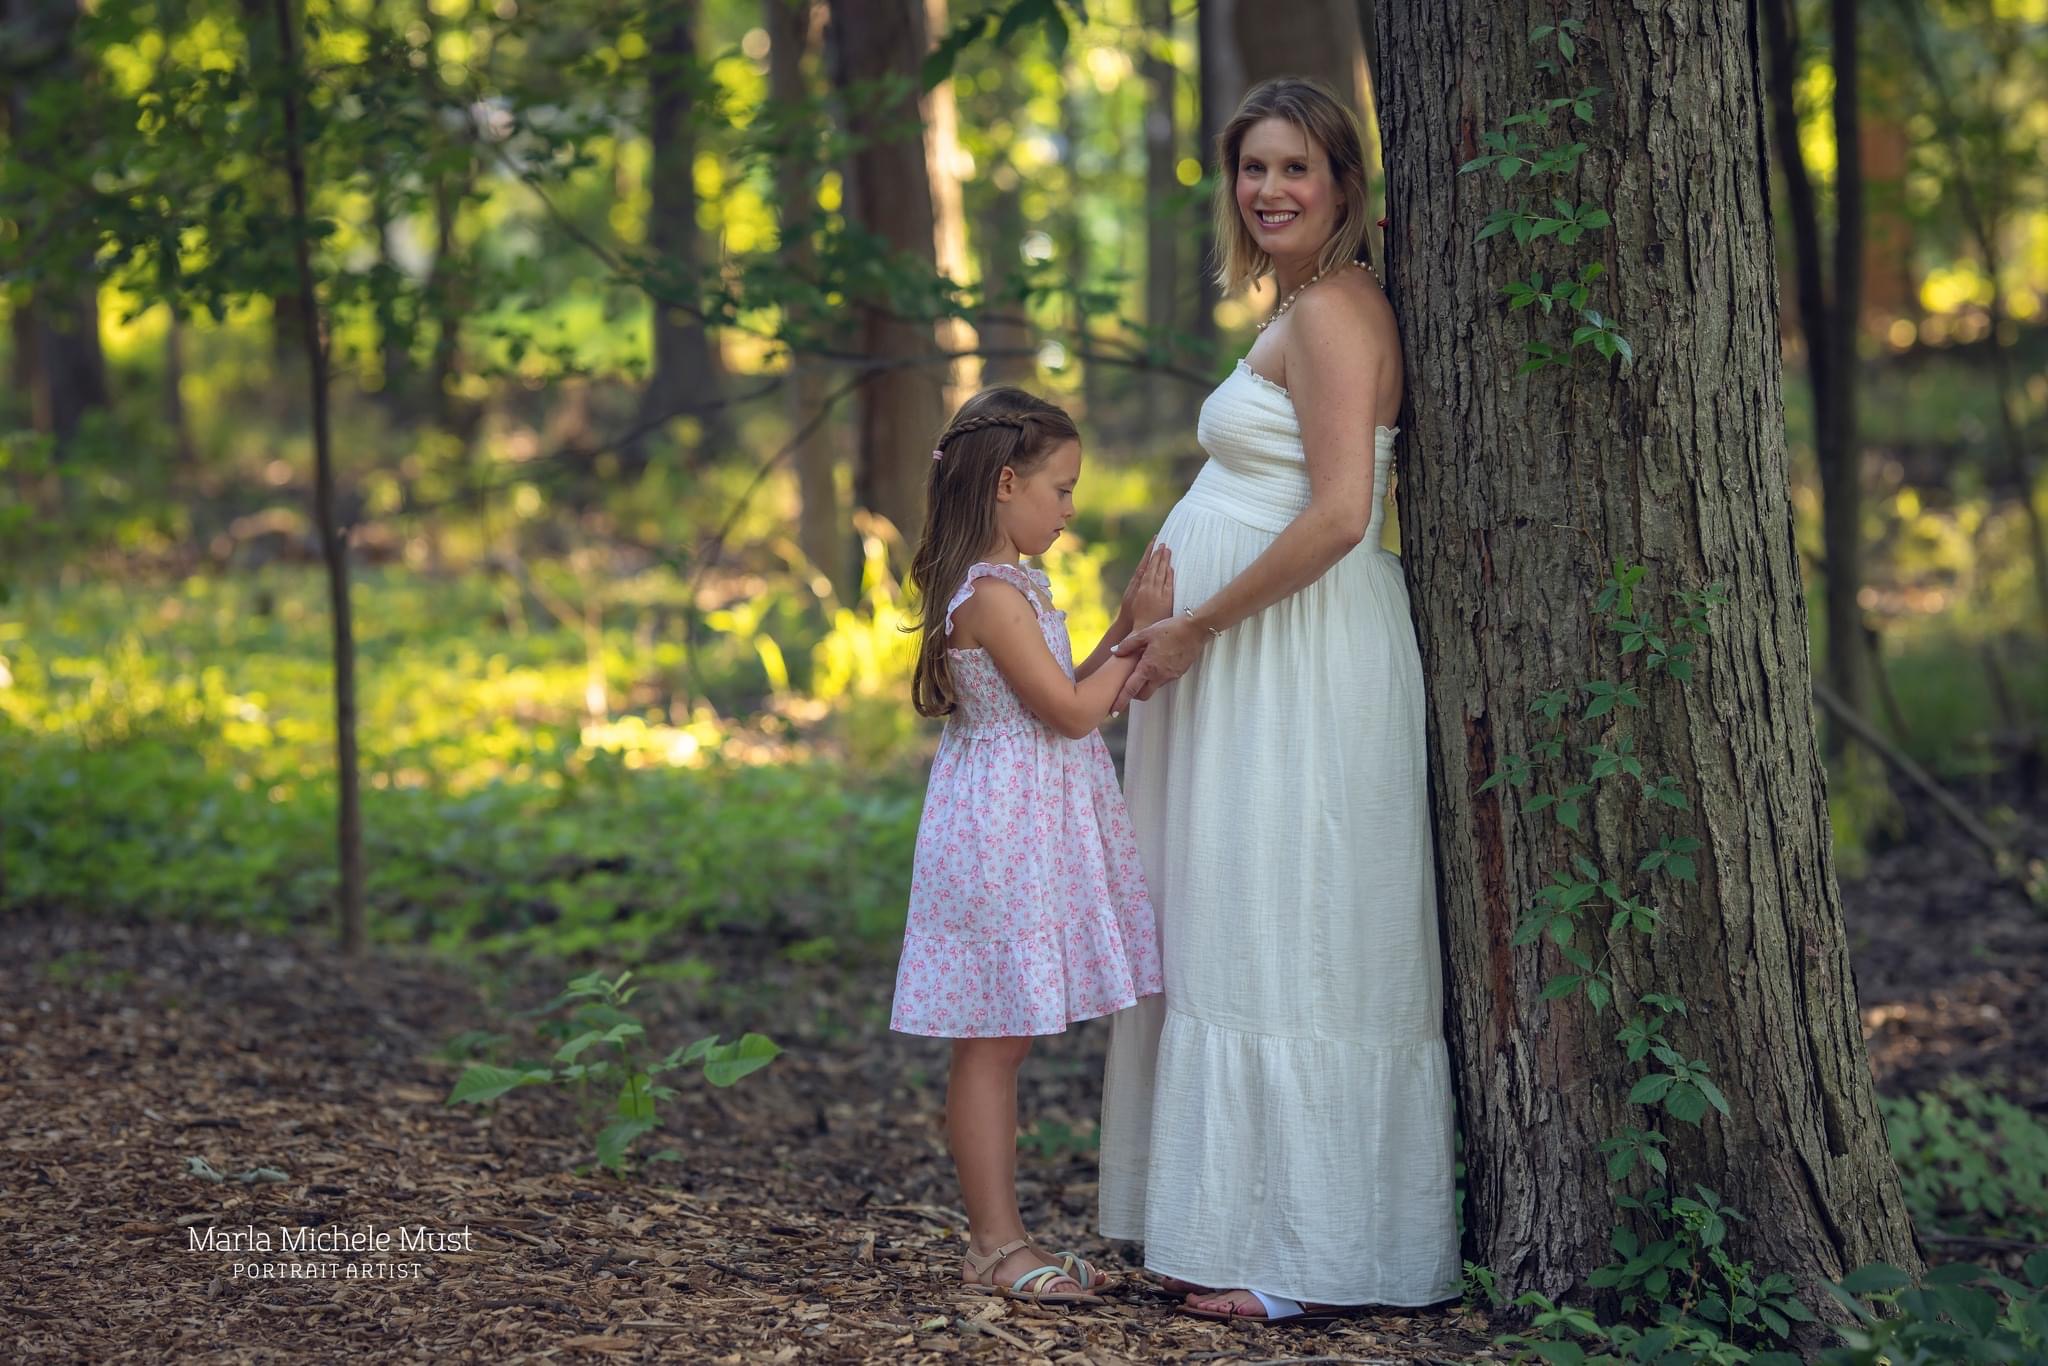 An expecting woman stands against a tree in a Detroit, her daughter lovingly placing a hand on her belly; a moment captured by a Michigan maternity photographer.